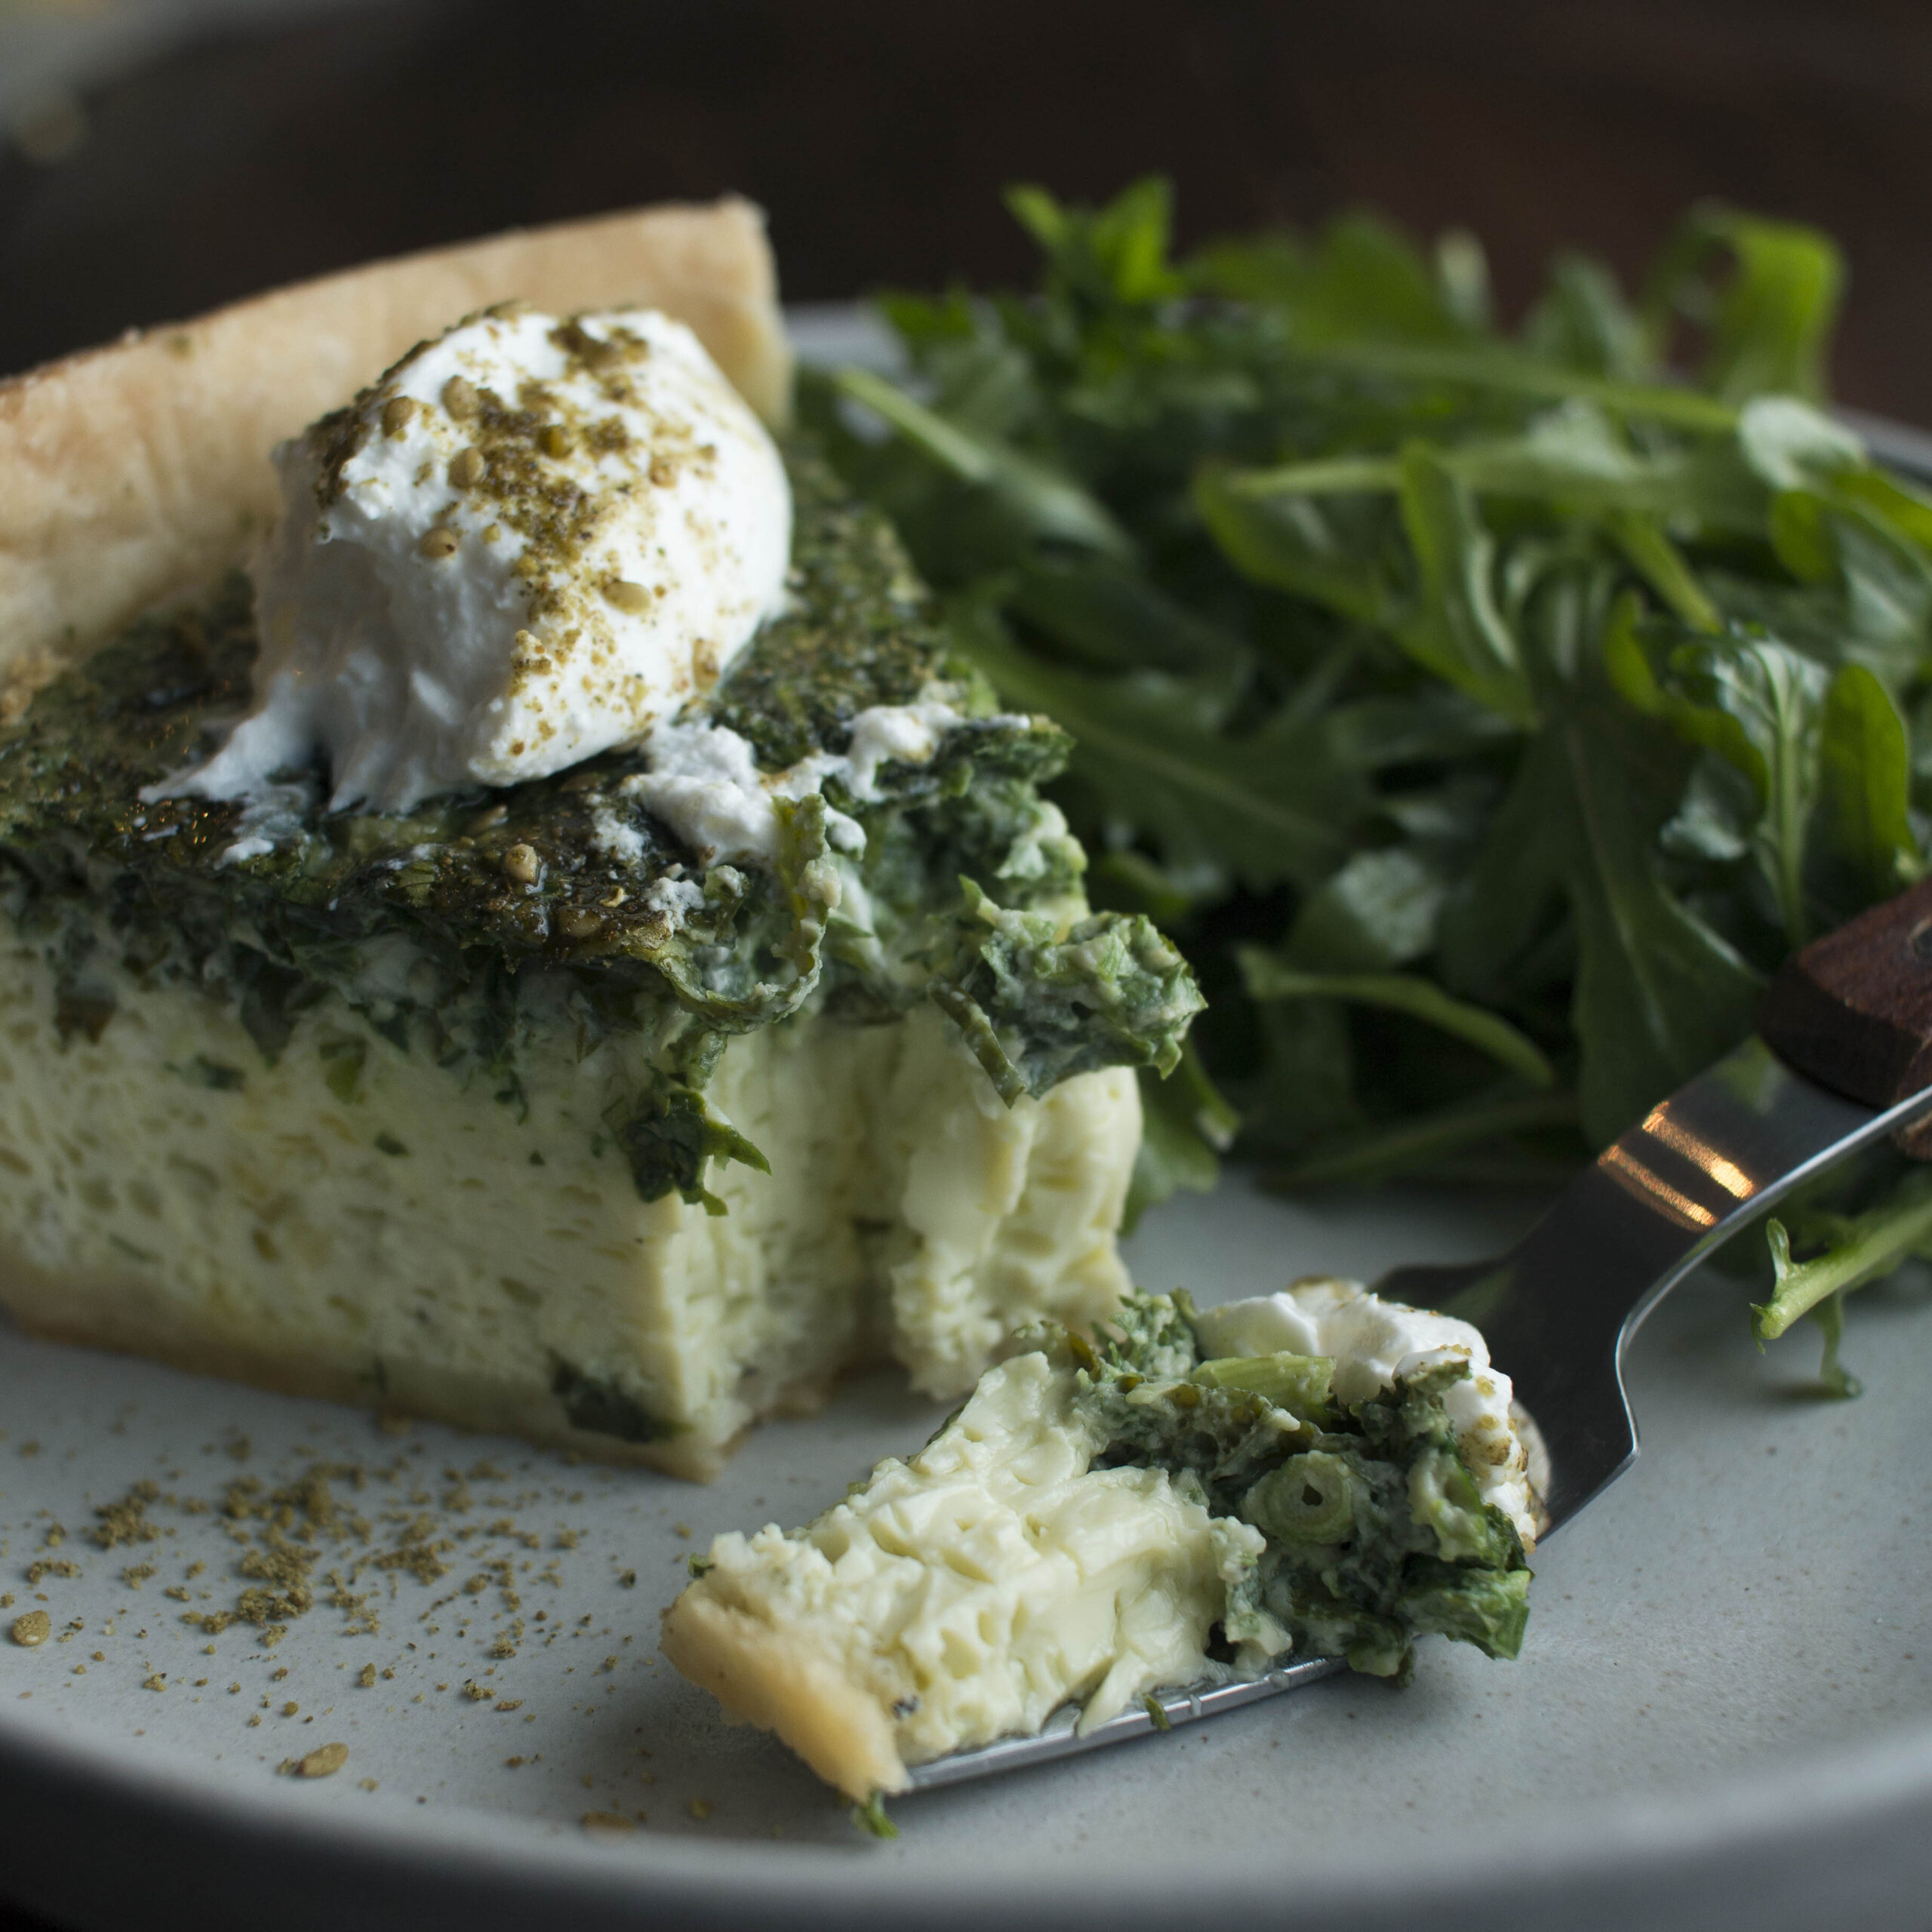 Ejjeh Quiche made with cialntro, mint, and parsley topped with labne & za'atar | I Will Not Eat Oysters